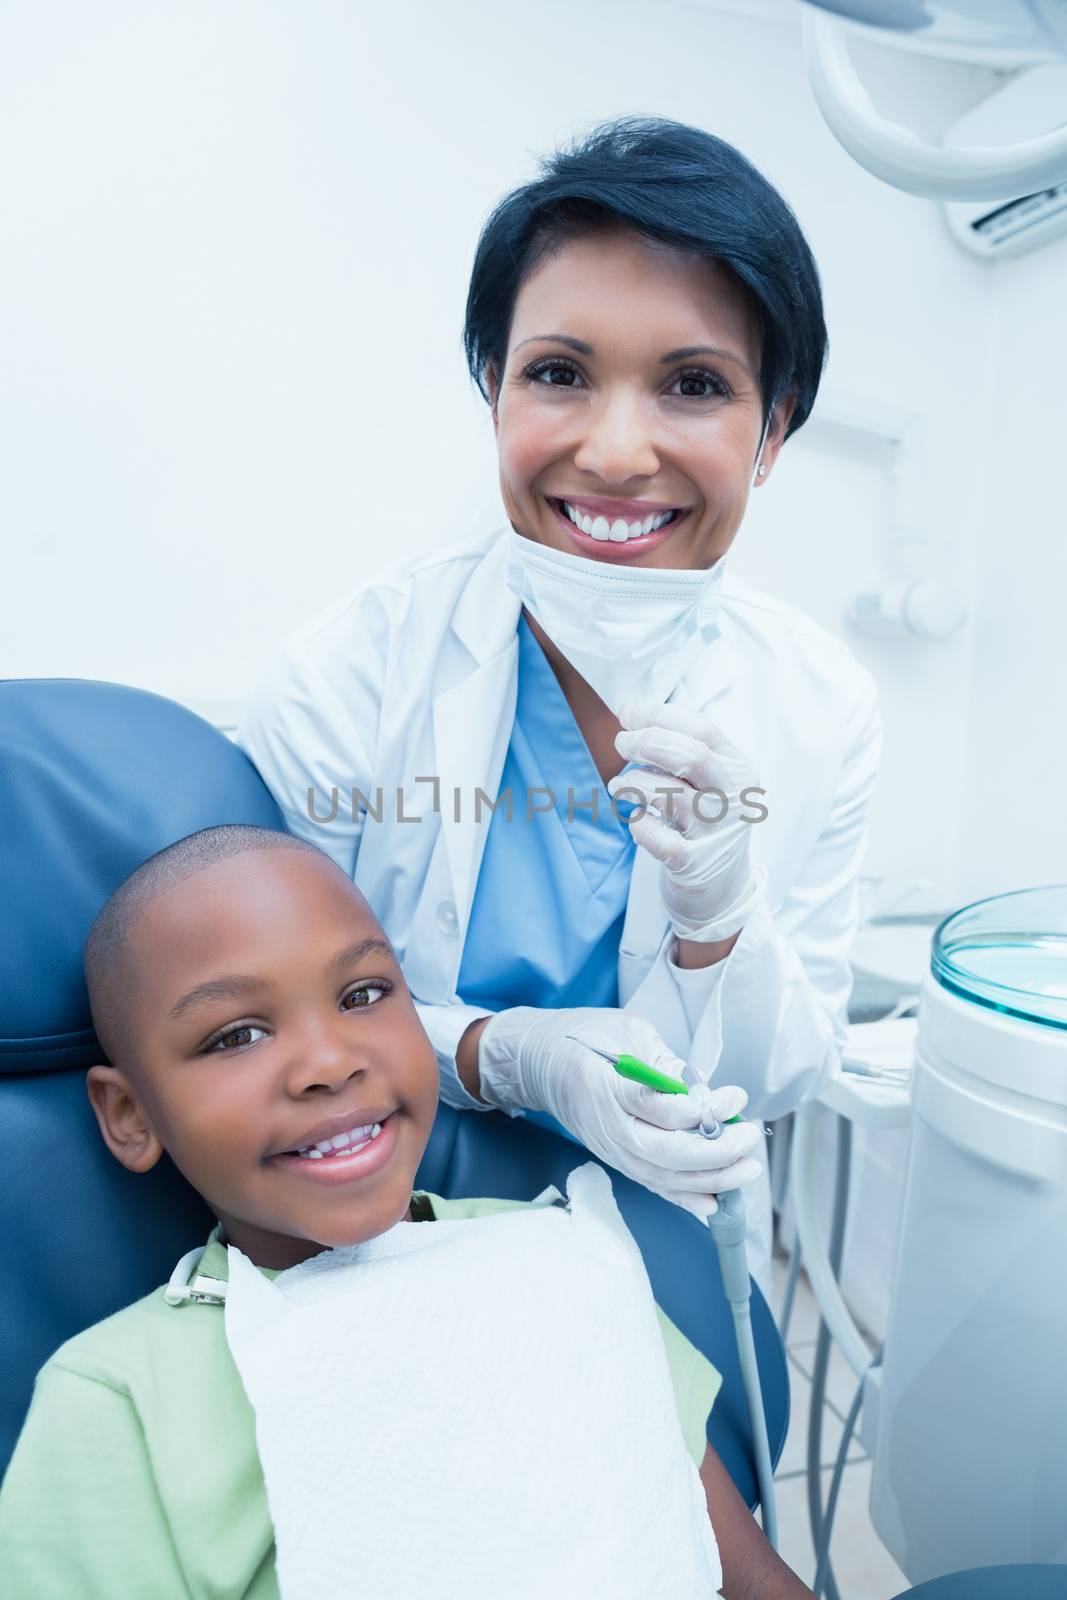 Portrait of smiling female dentist examining boys teeth in the dentists chair